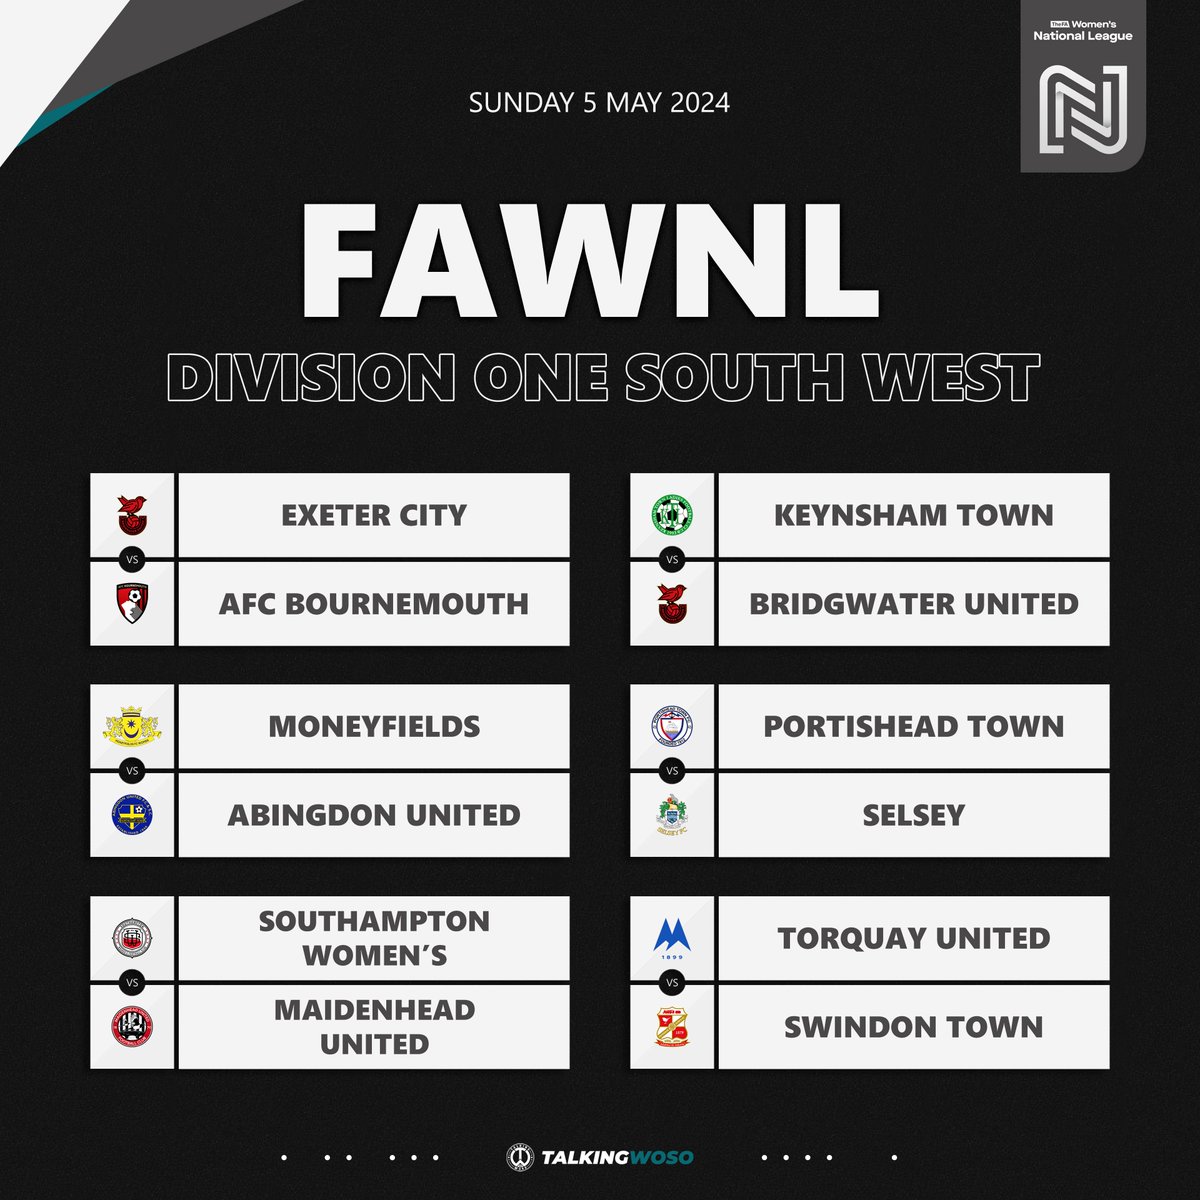 𝗙𝗜𝗫𝗧𝗨𝗥𝗘𝗦 | FAWNL Division One 

Sunday's Women's National League fixtures across the fourth tier in the Division One North, Midlands, South East and South West.

#FAWNL #WeAreNational